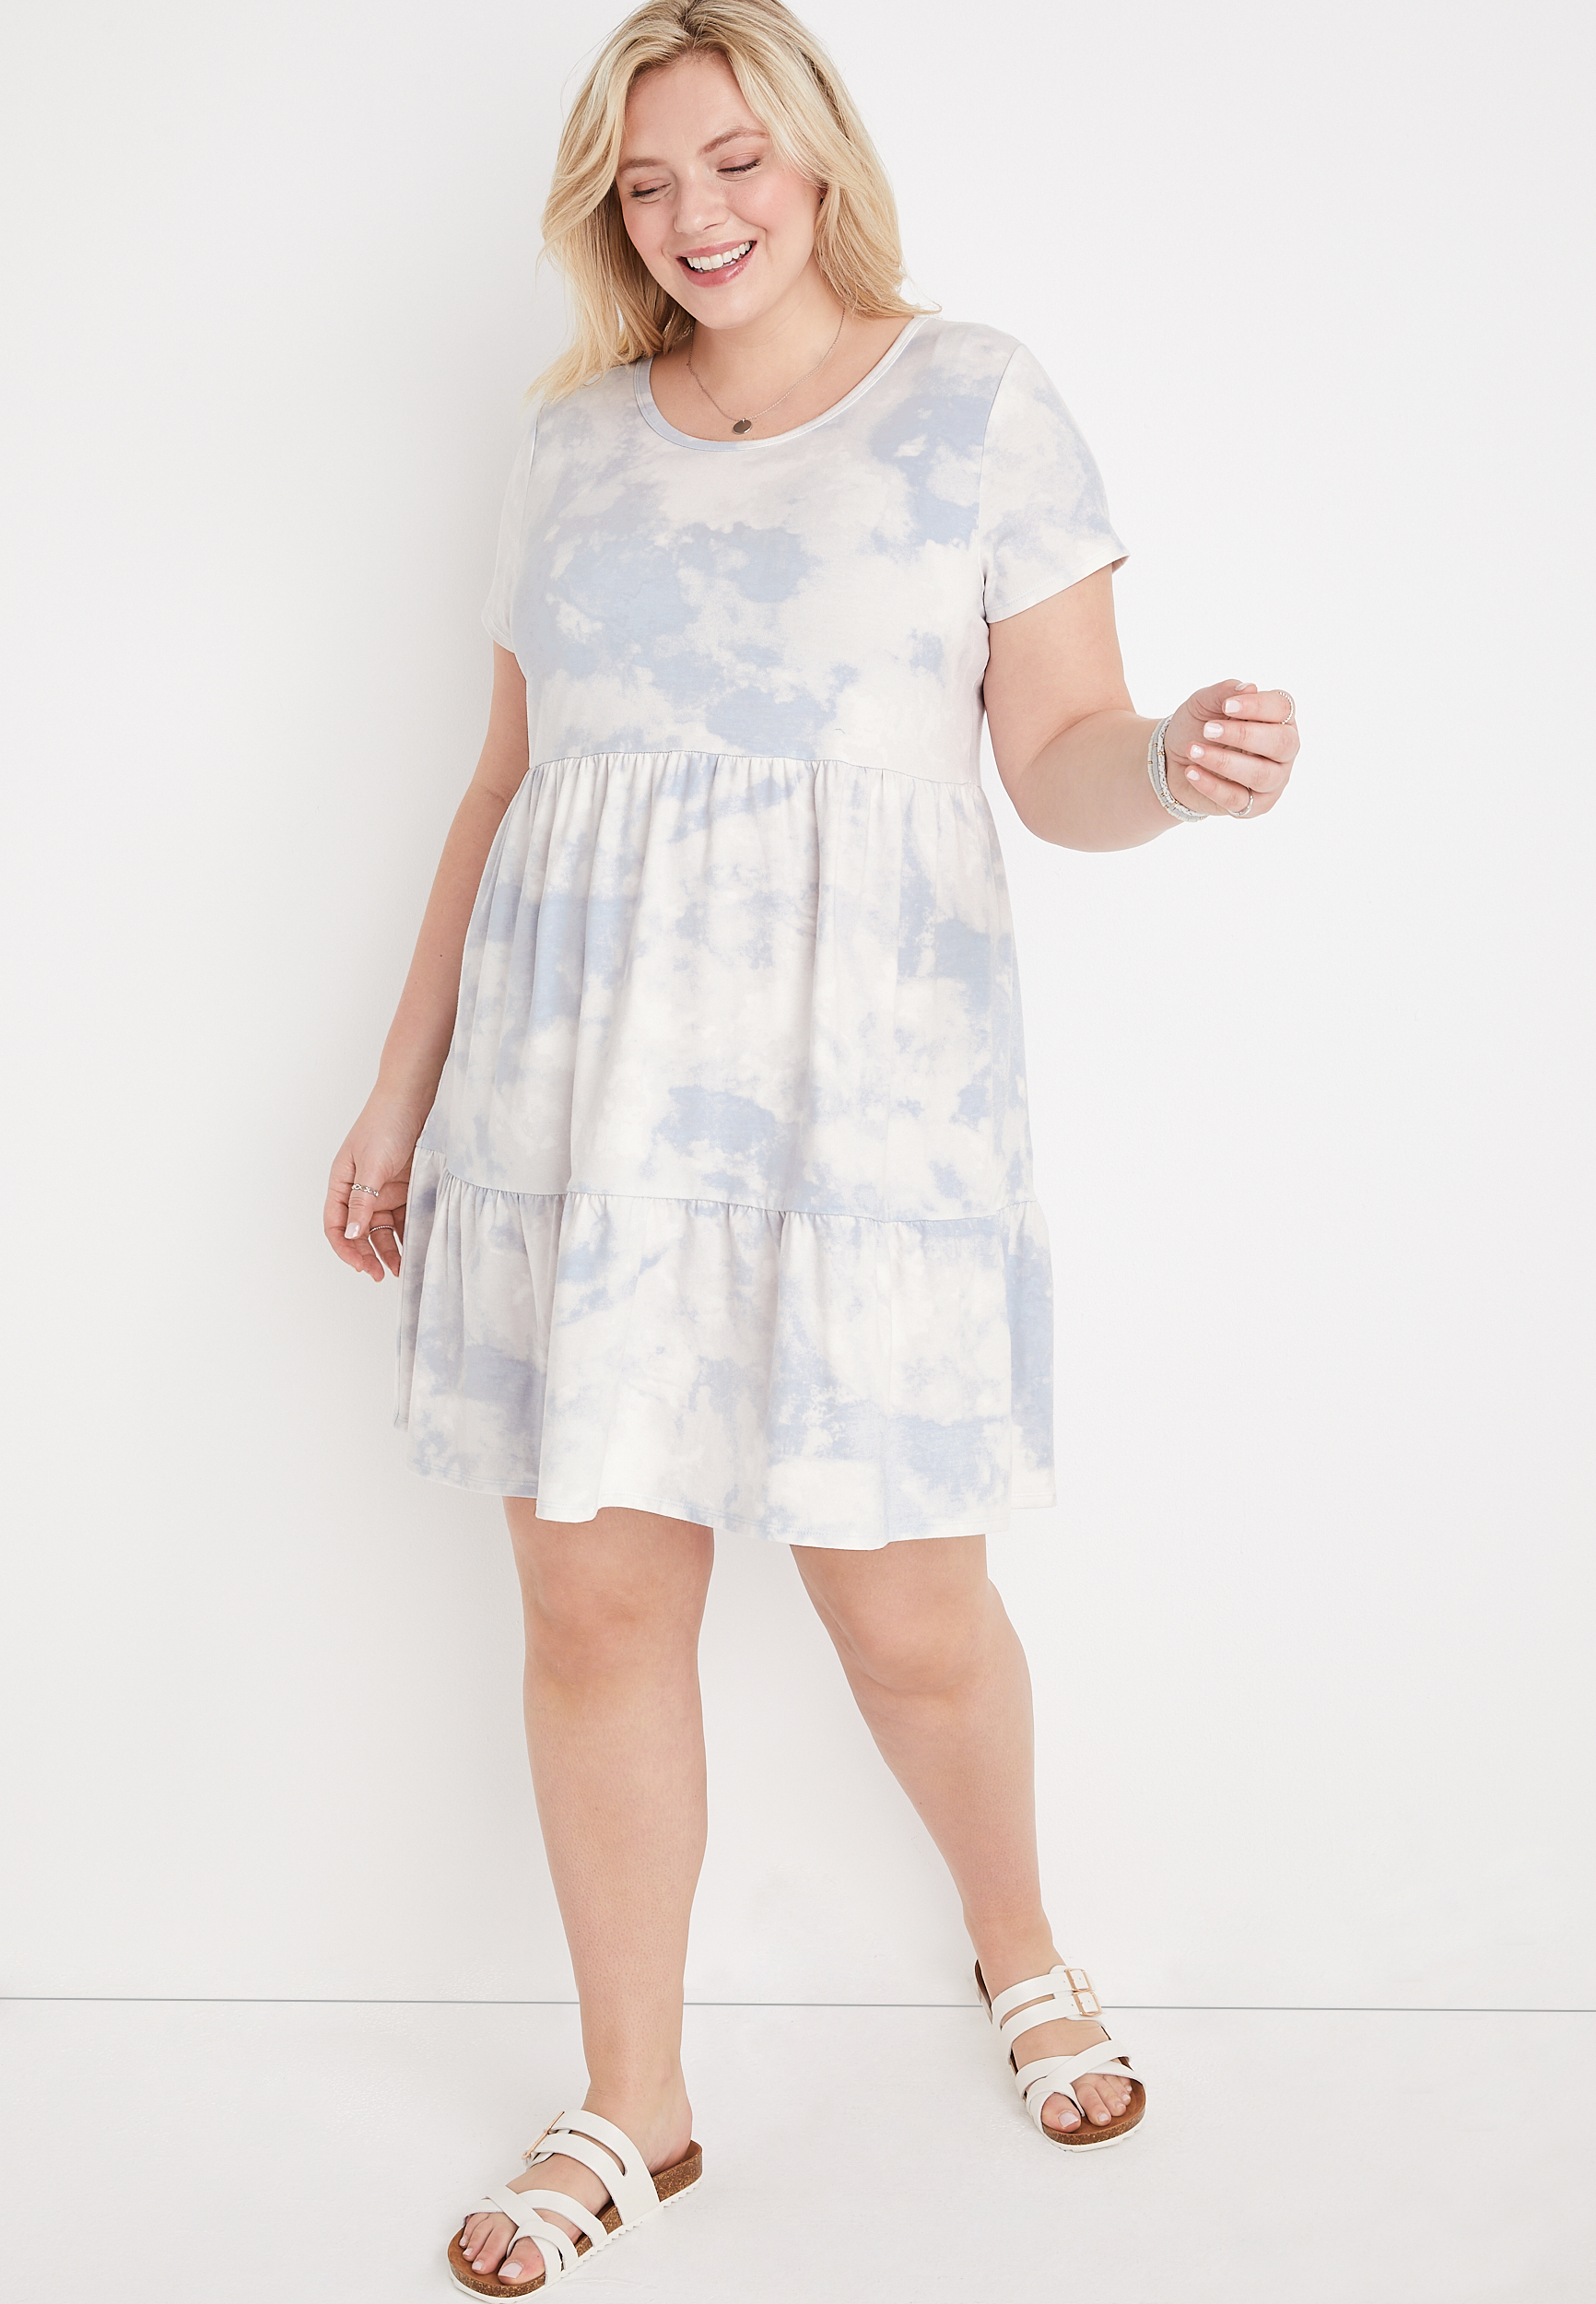 Plus Size 24/7 Tie Dye Tiered Babydoll Mini Dress | maurices